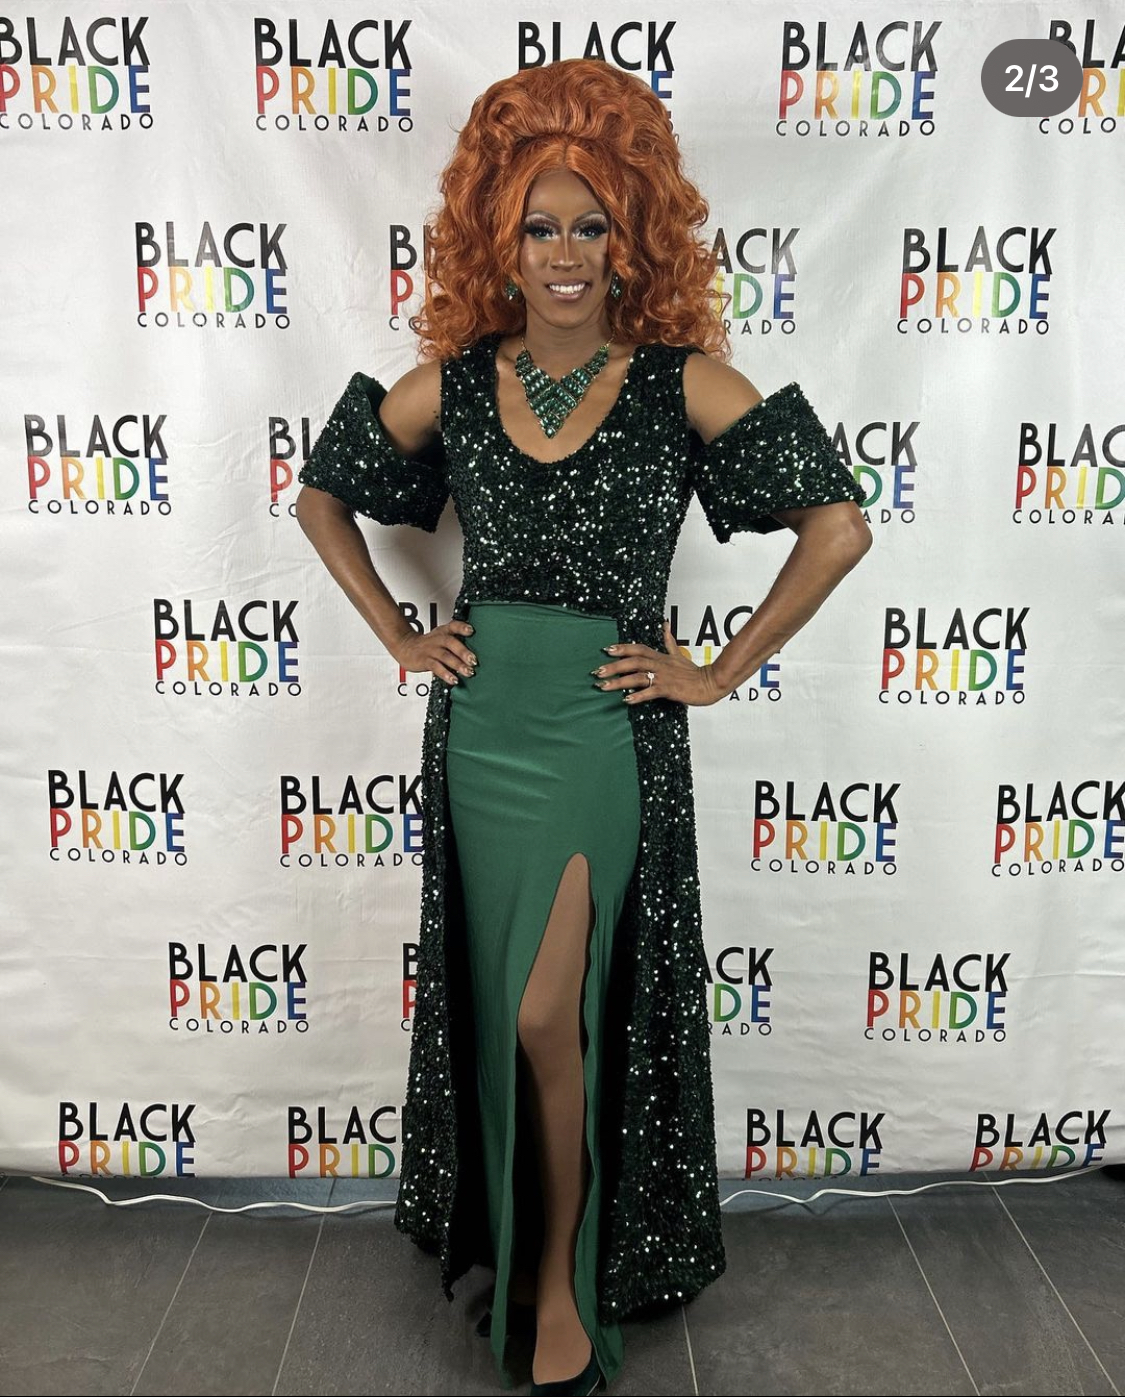 Juiccy Misdemeanor in front of a step and repeat background for Black Pride Colorado